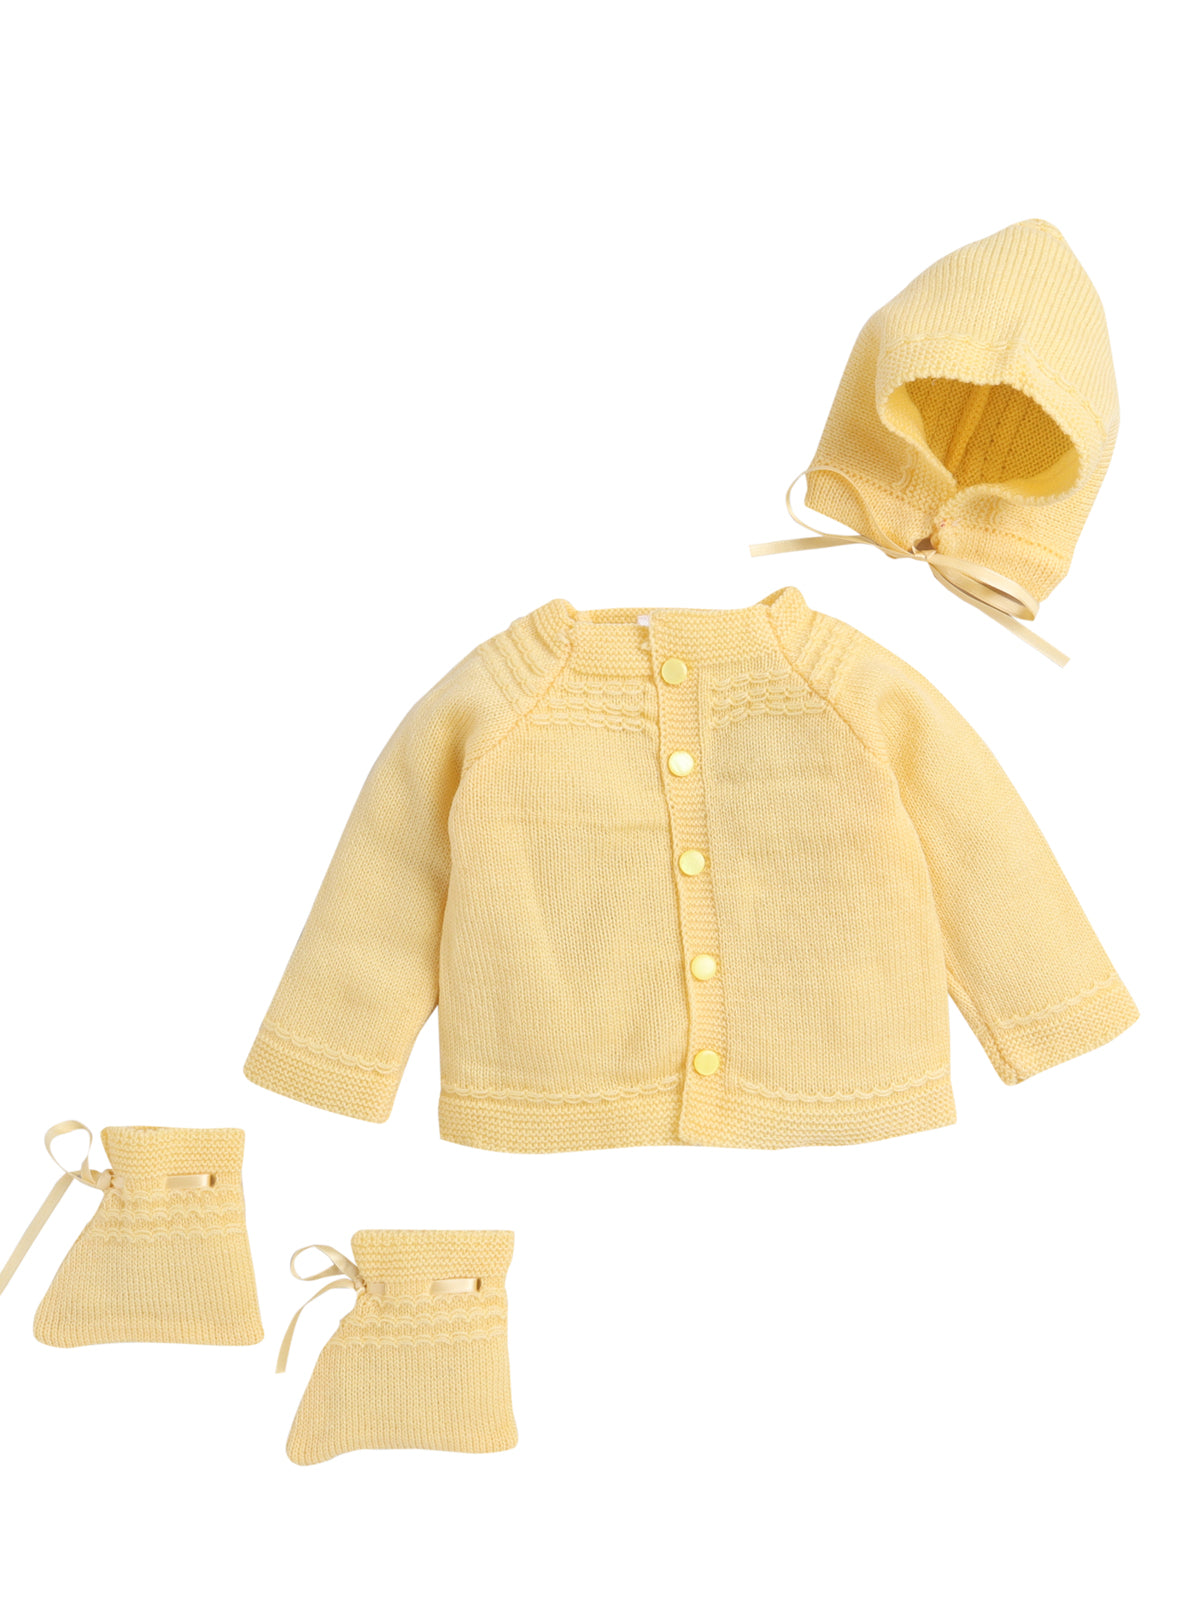 Full Sleeves Front Open Yellow Color Self Design Sweater Set With Matching Caps and Socks for Baby